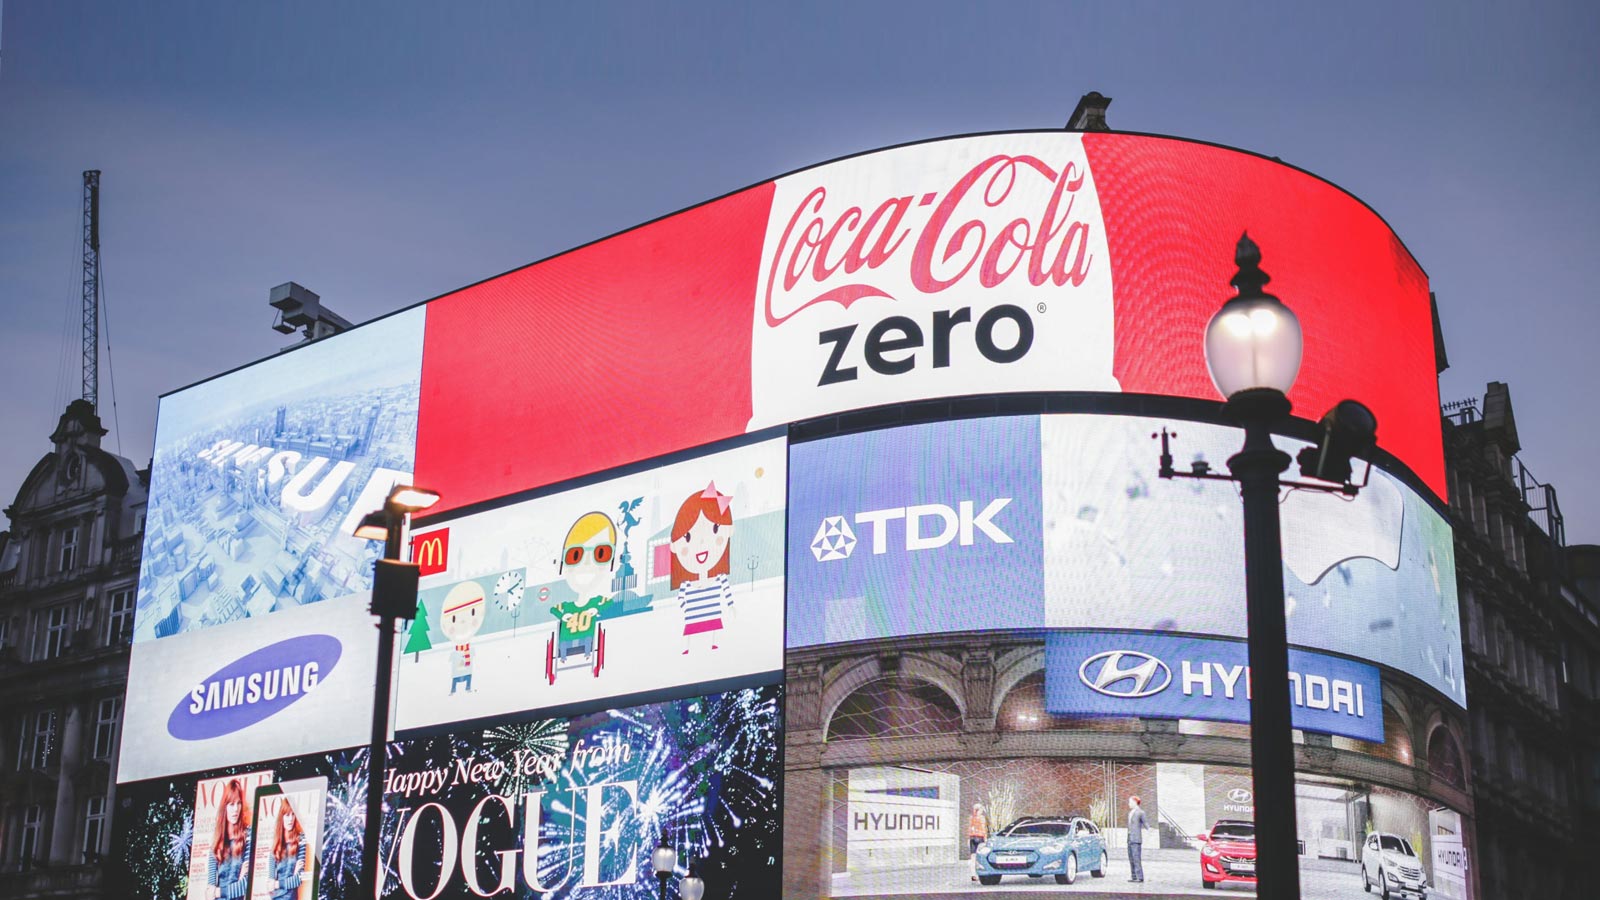 How brands establish themselves throughout the world